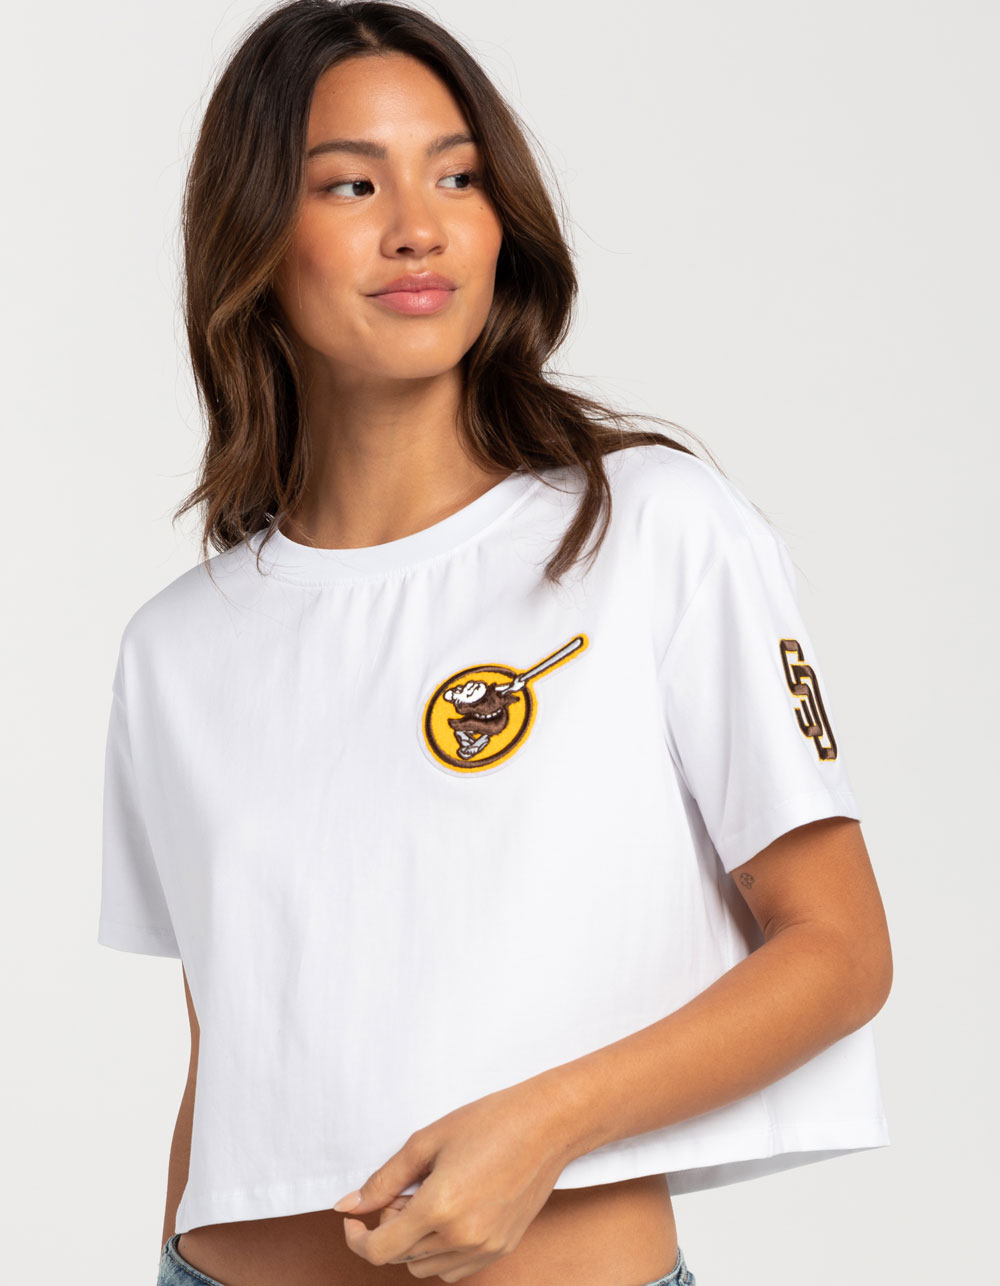 Women's San Diego Padres Nike Gear, Womens Padres Apparel, Nike Ladies  Padres Outfits